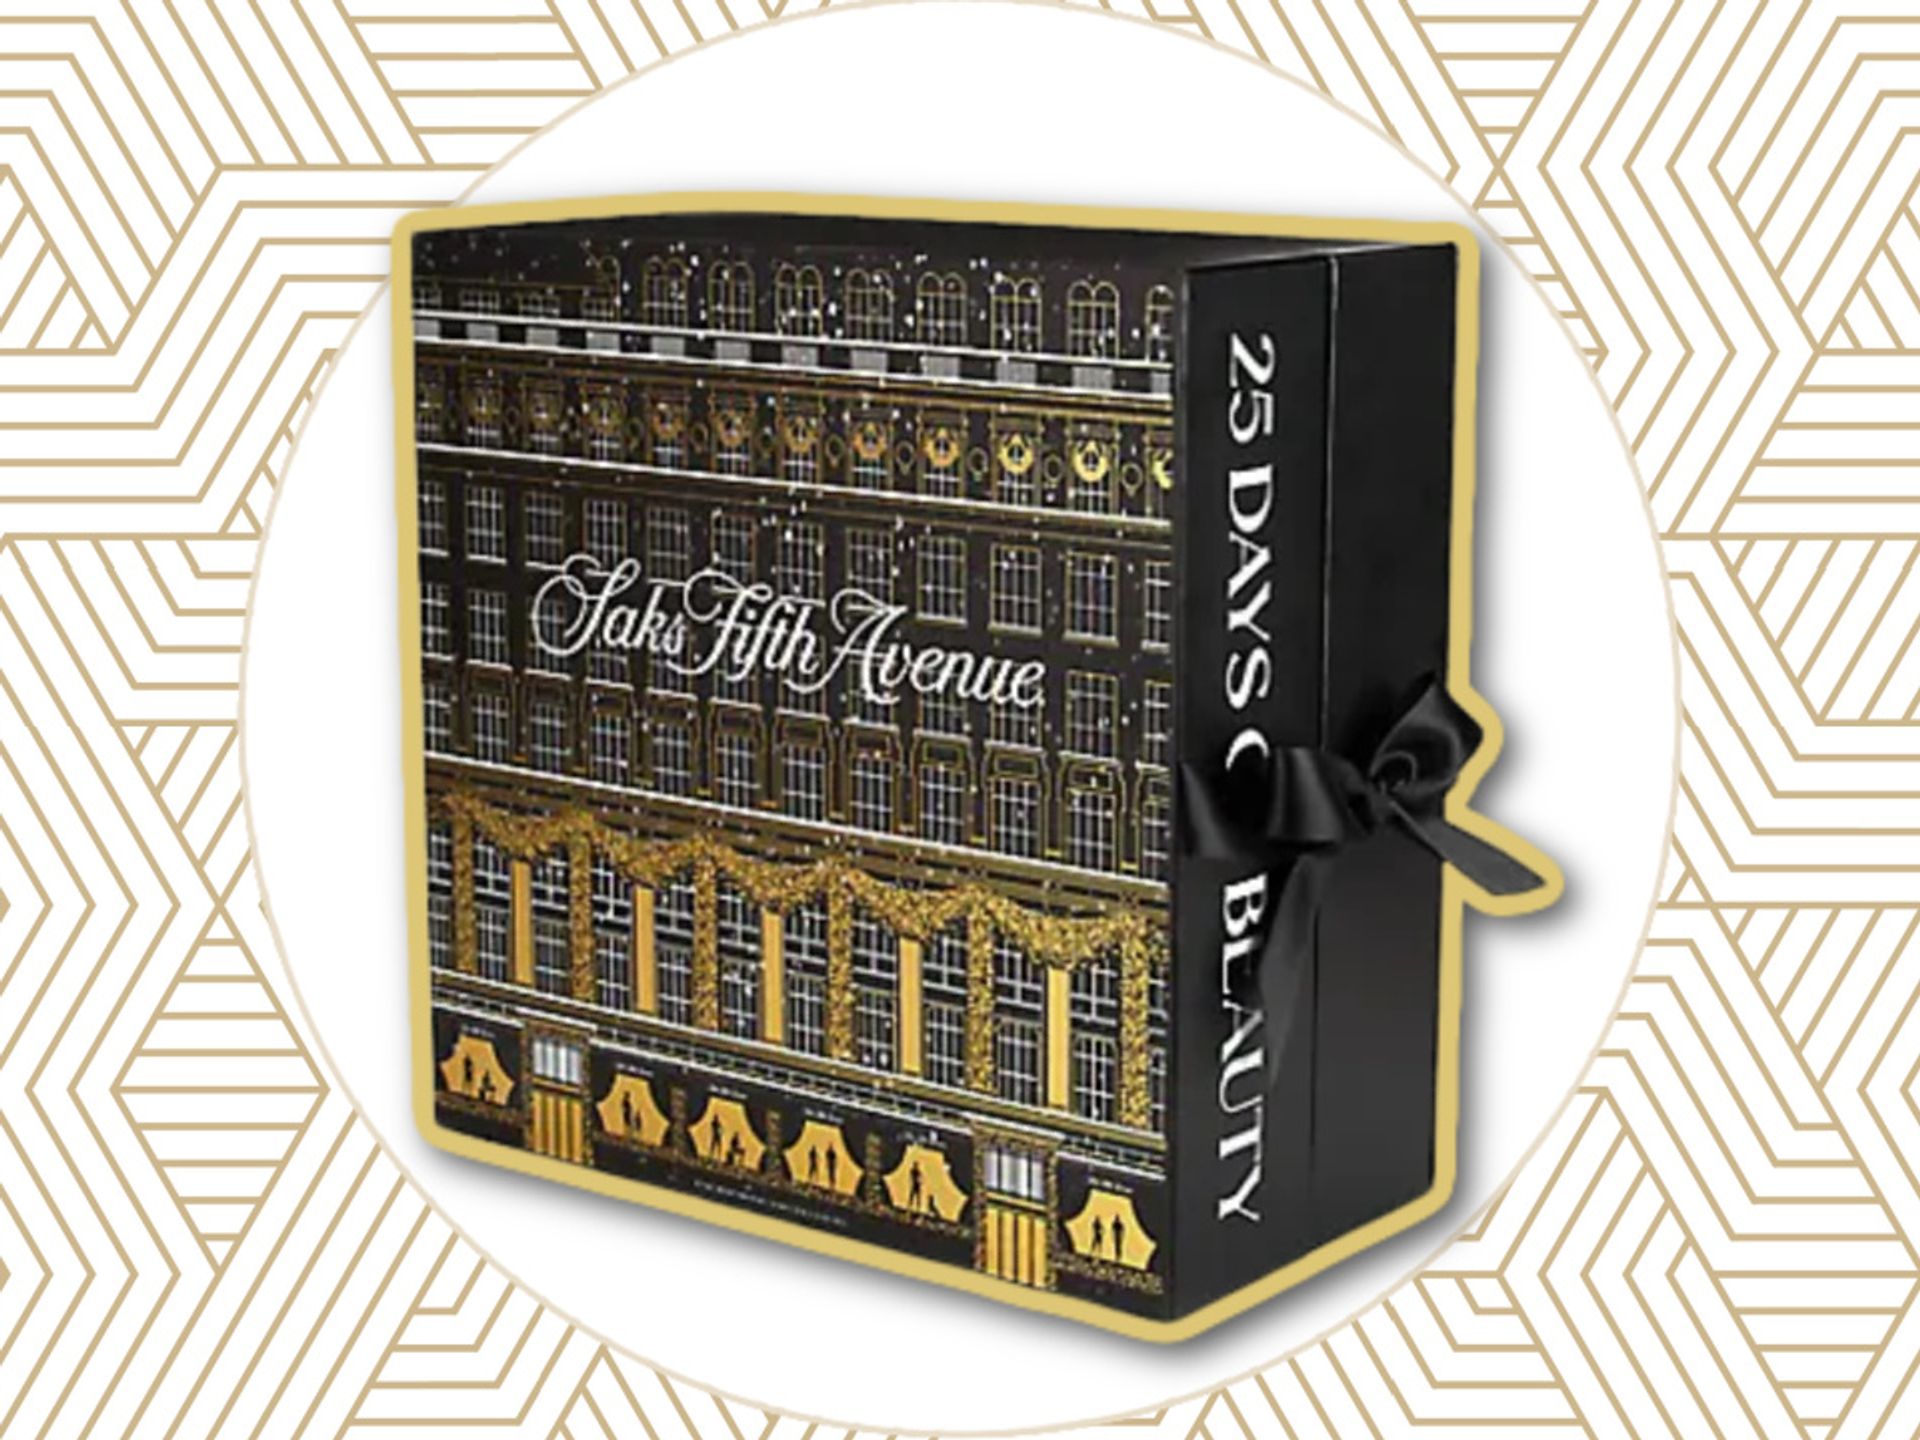 Saks Fifth Avenue - A Gift For You: Receive a limited-edition